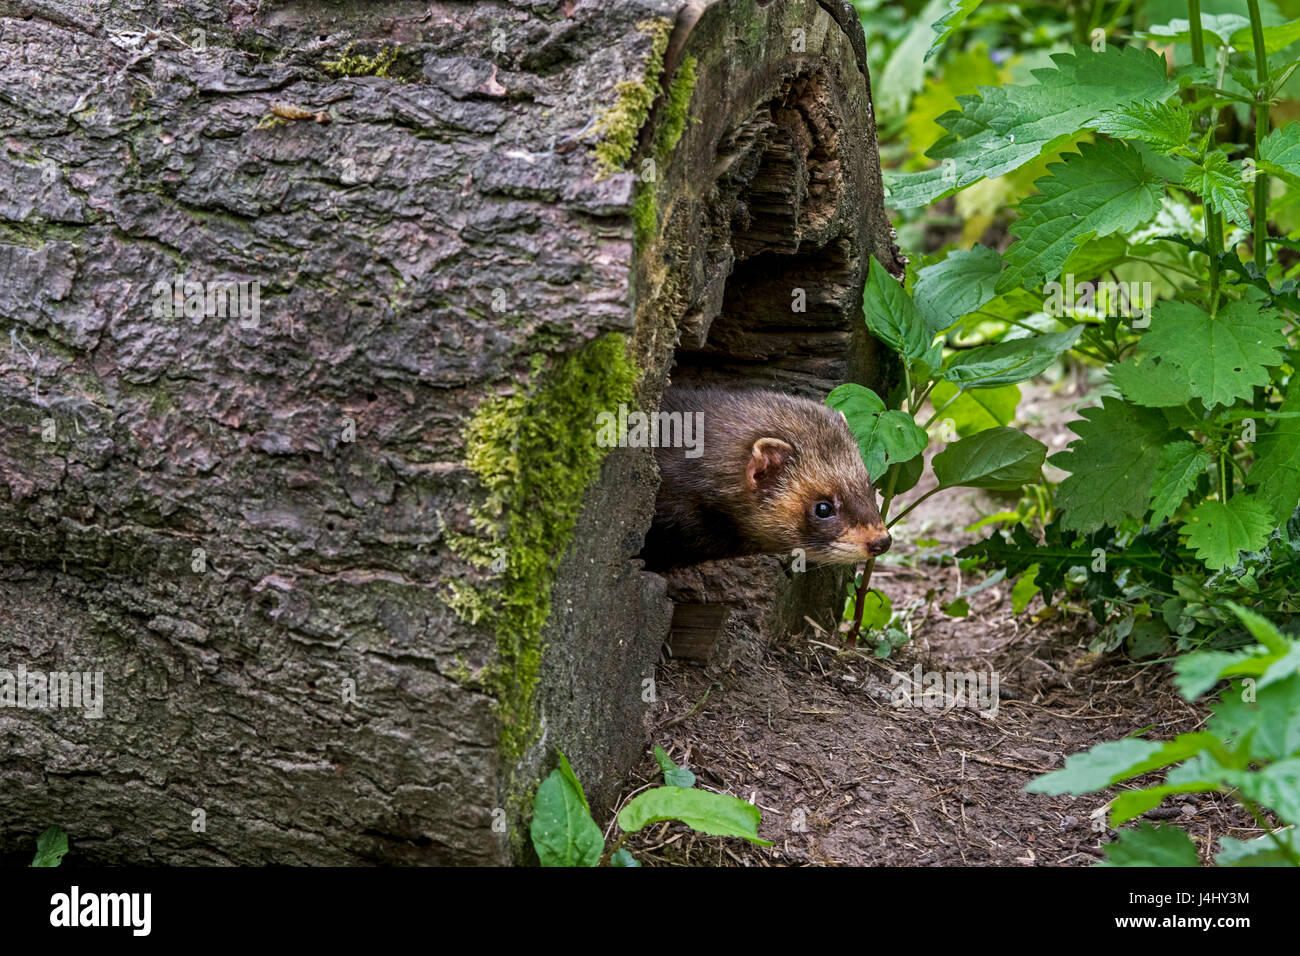 European polecat (Mustela putorius) emerging from nest in hollow tree trunk in forest Stock Photo